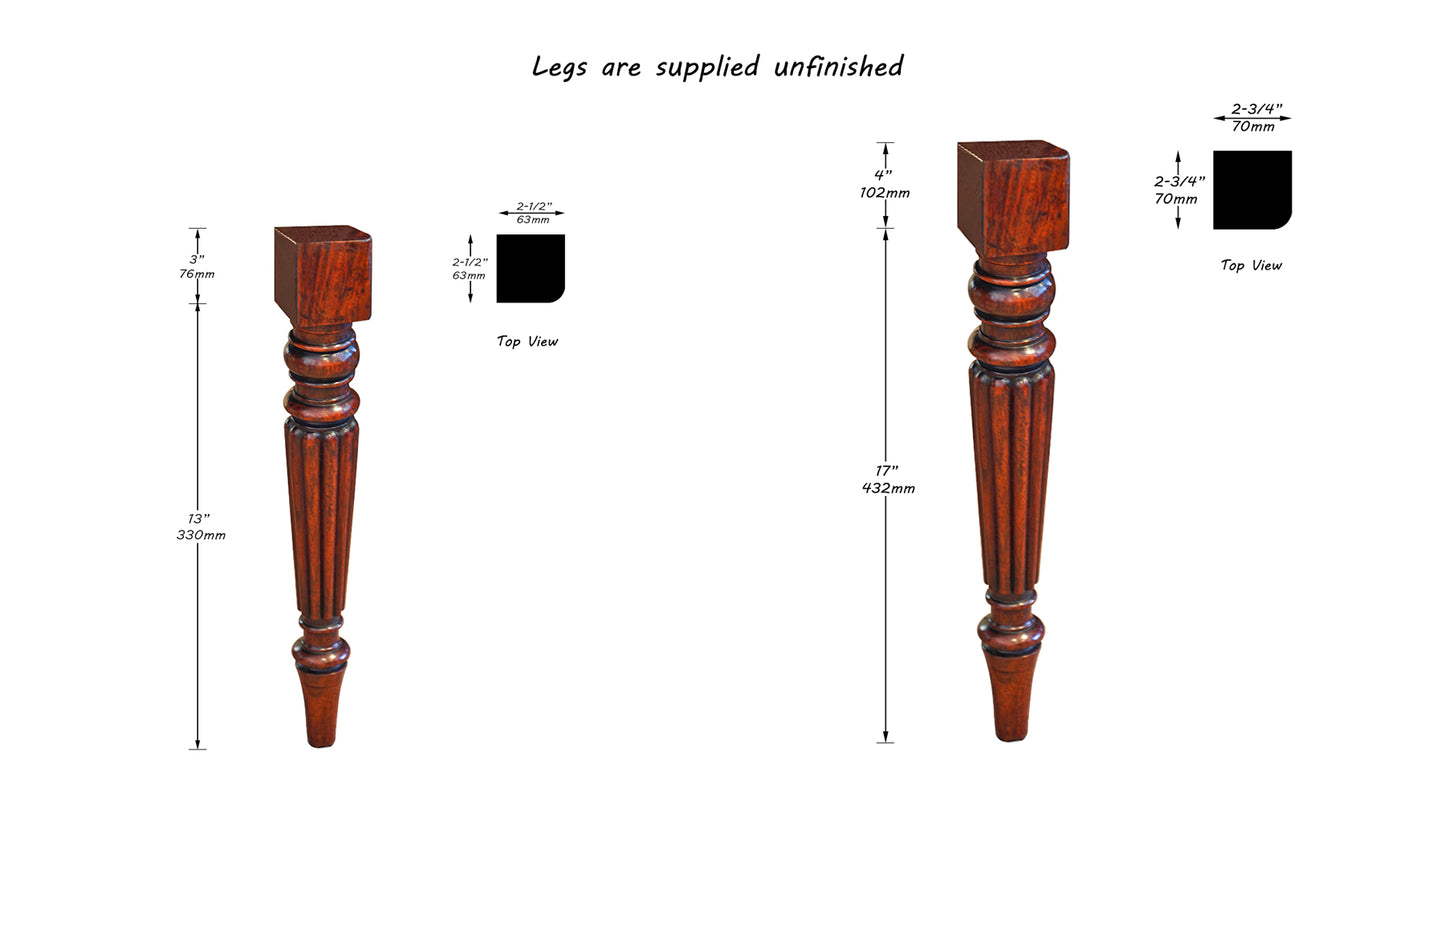 PAIR of Traditional French Style Chair Legs, Available in 16" & 21" High,  Unfinished